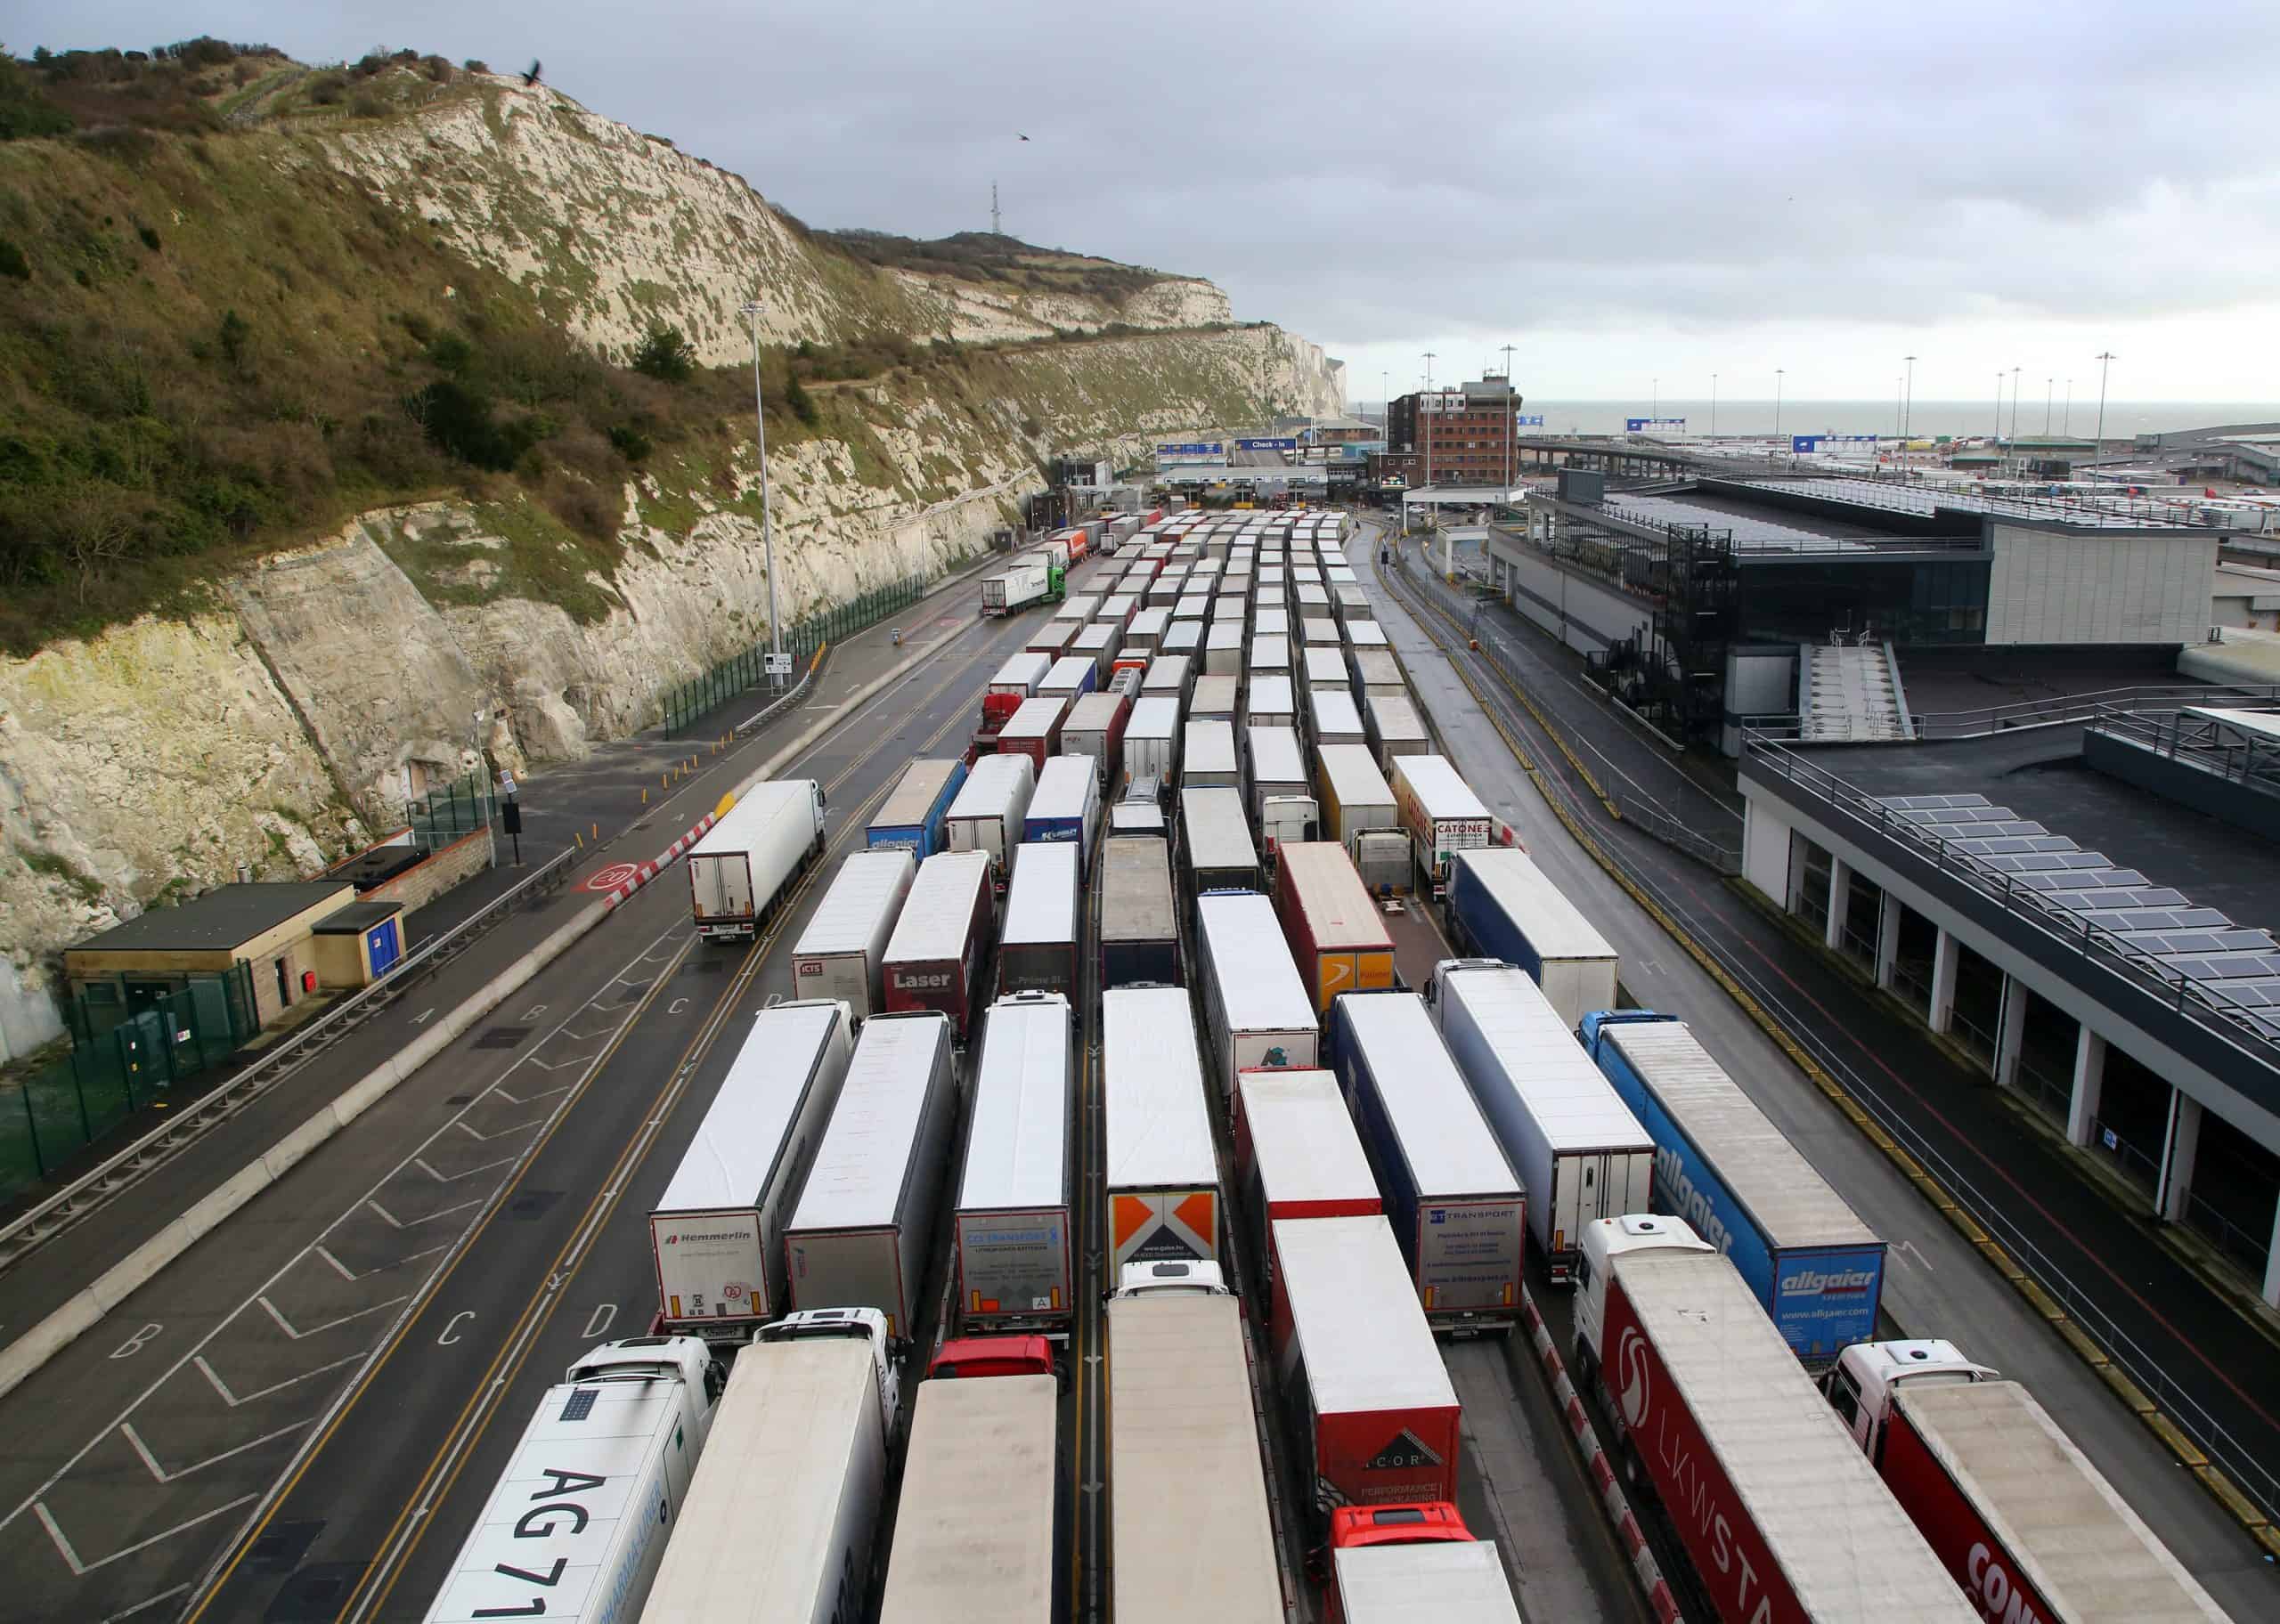 Lorries carrying aid to Ukraine stuck at Dover because of…. well, you guessed it